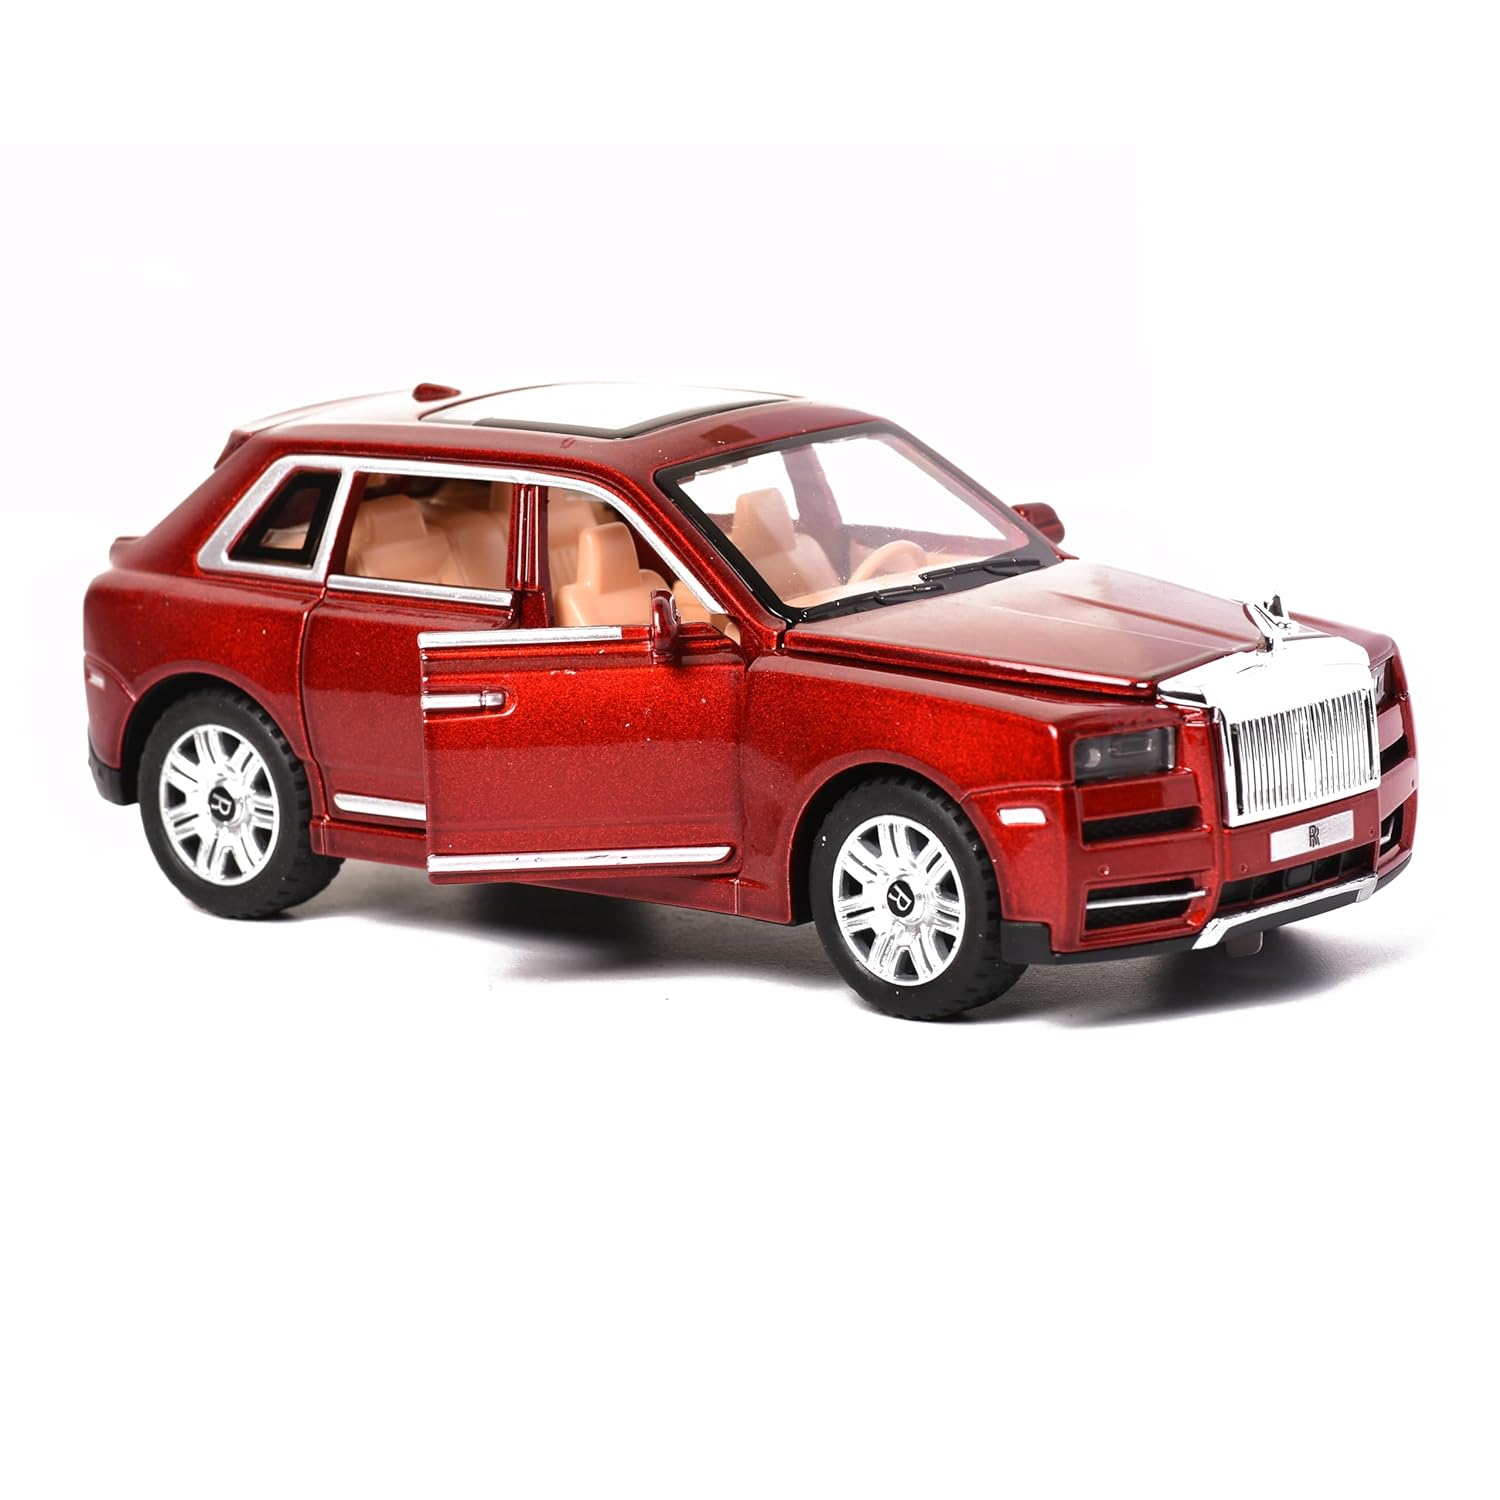 Braintastic Model Diecast Car Toy Vehicle Pull Back Friction Car with Openable Doors Light & Music Toys for Kids Age 3+ Years (Rolls Royce Red)